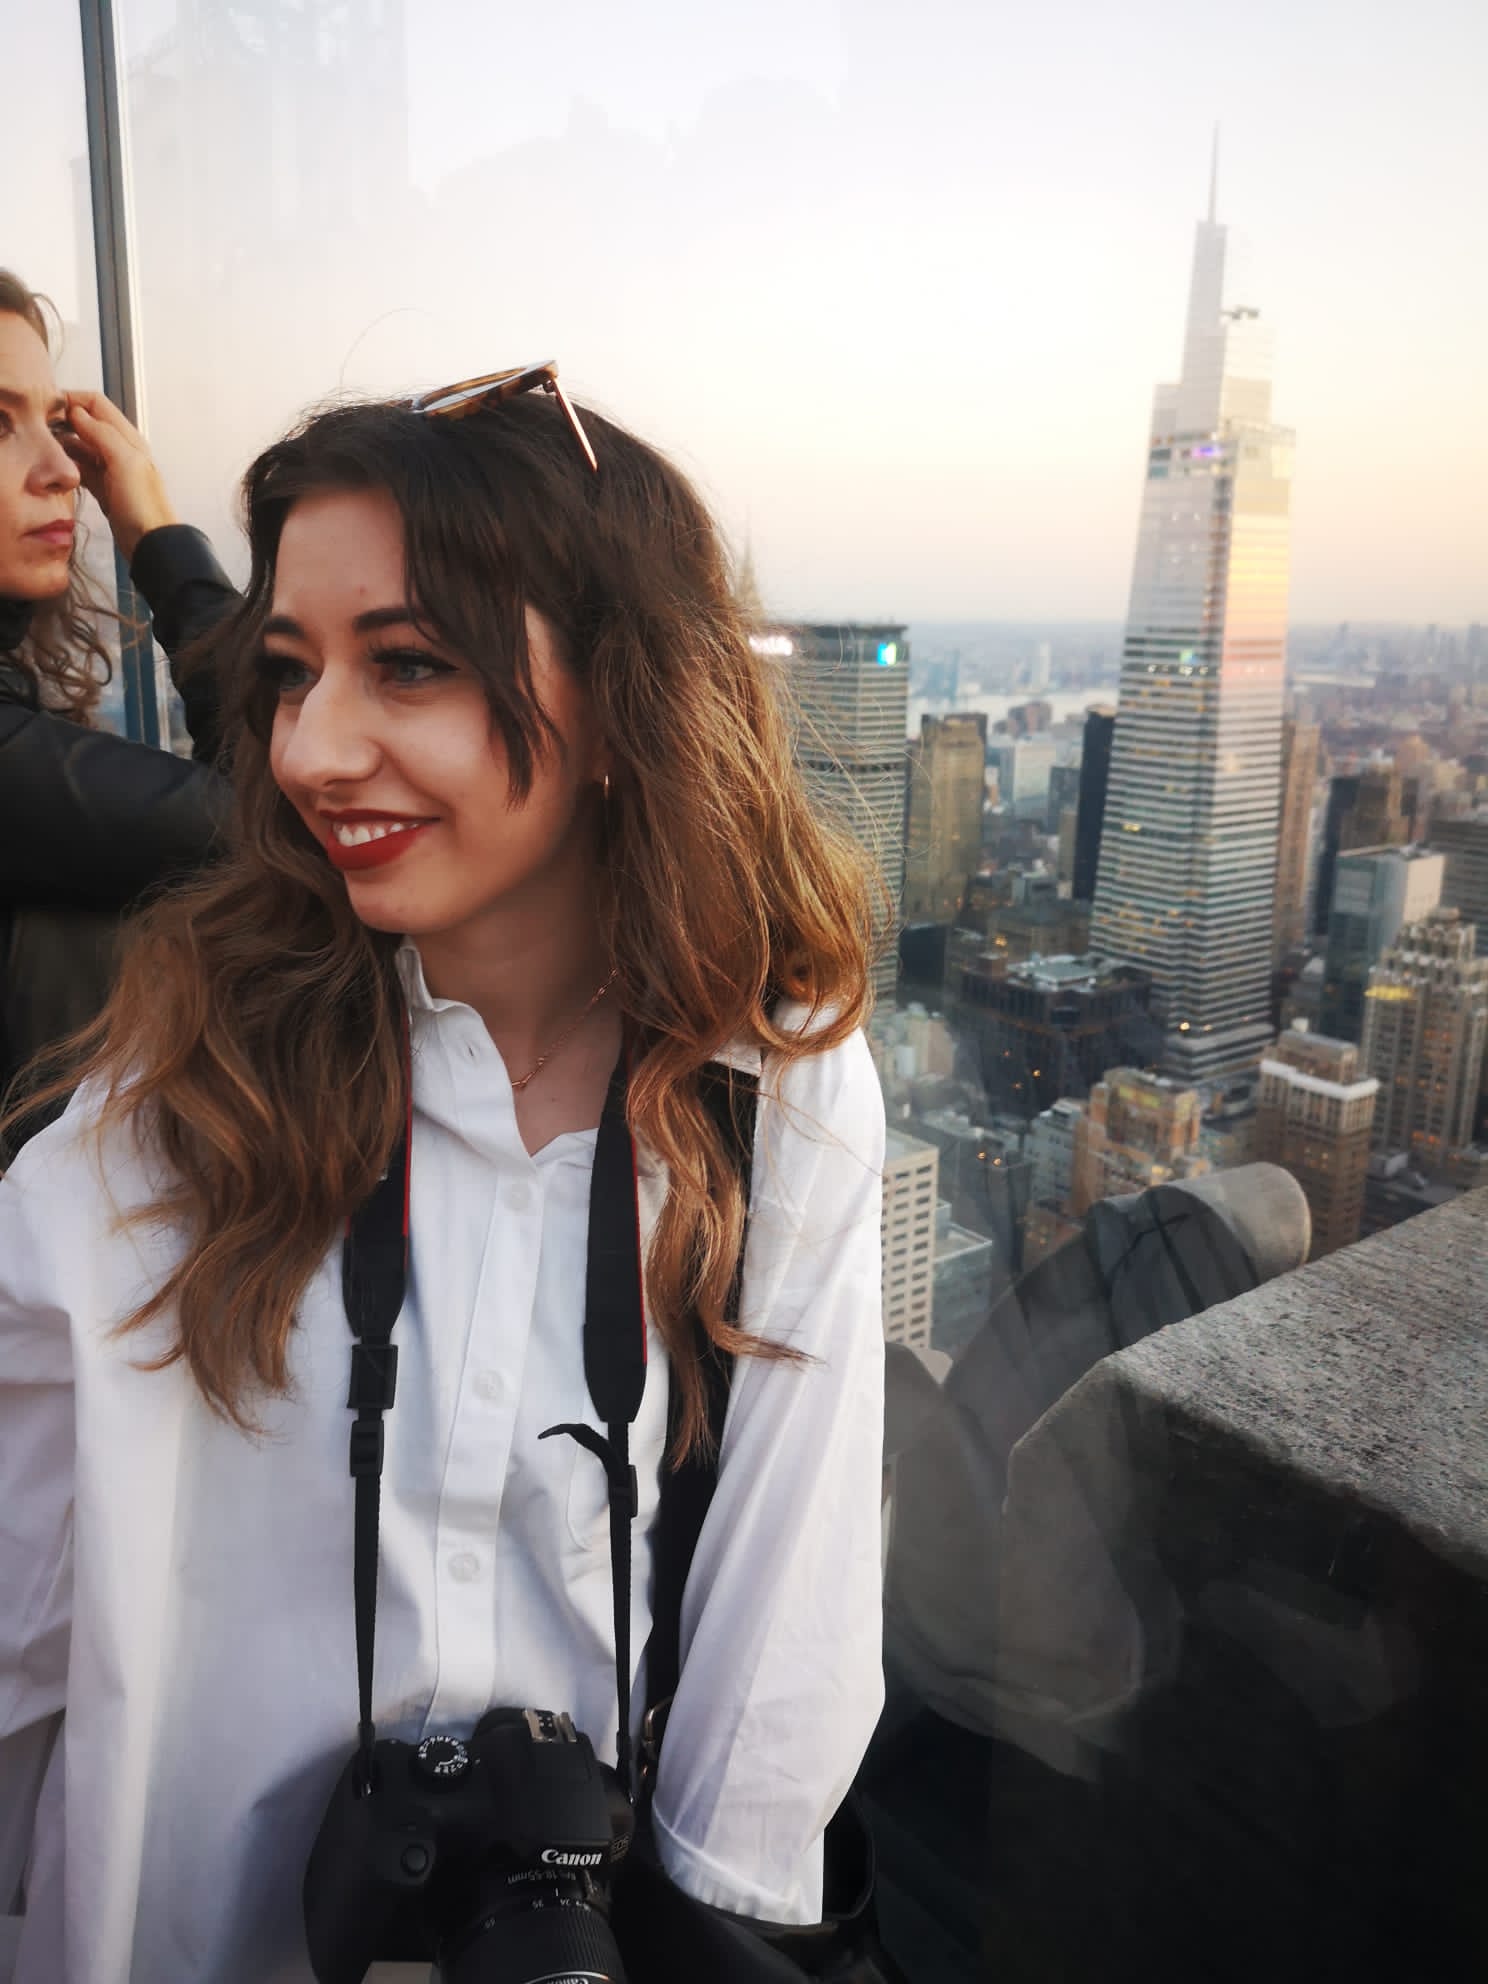 Image showing Rachel from CATCALL stood with New York City skyline in the background as seen from Top of the Rock at Rockefeller centre.